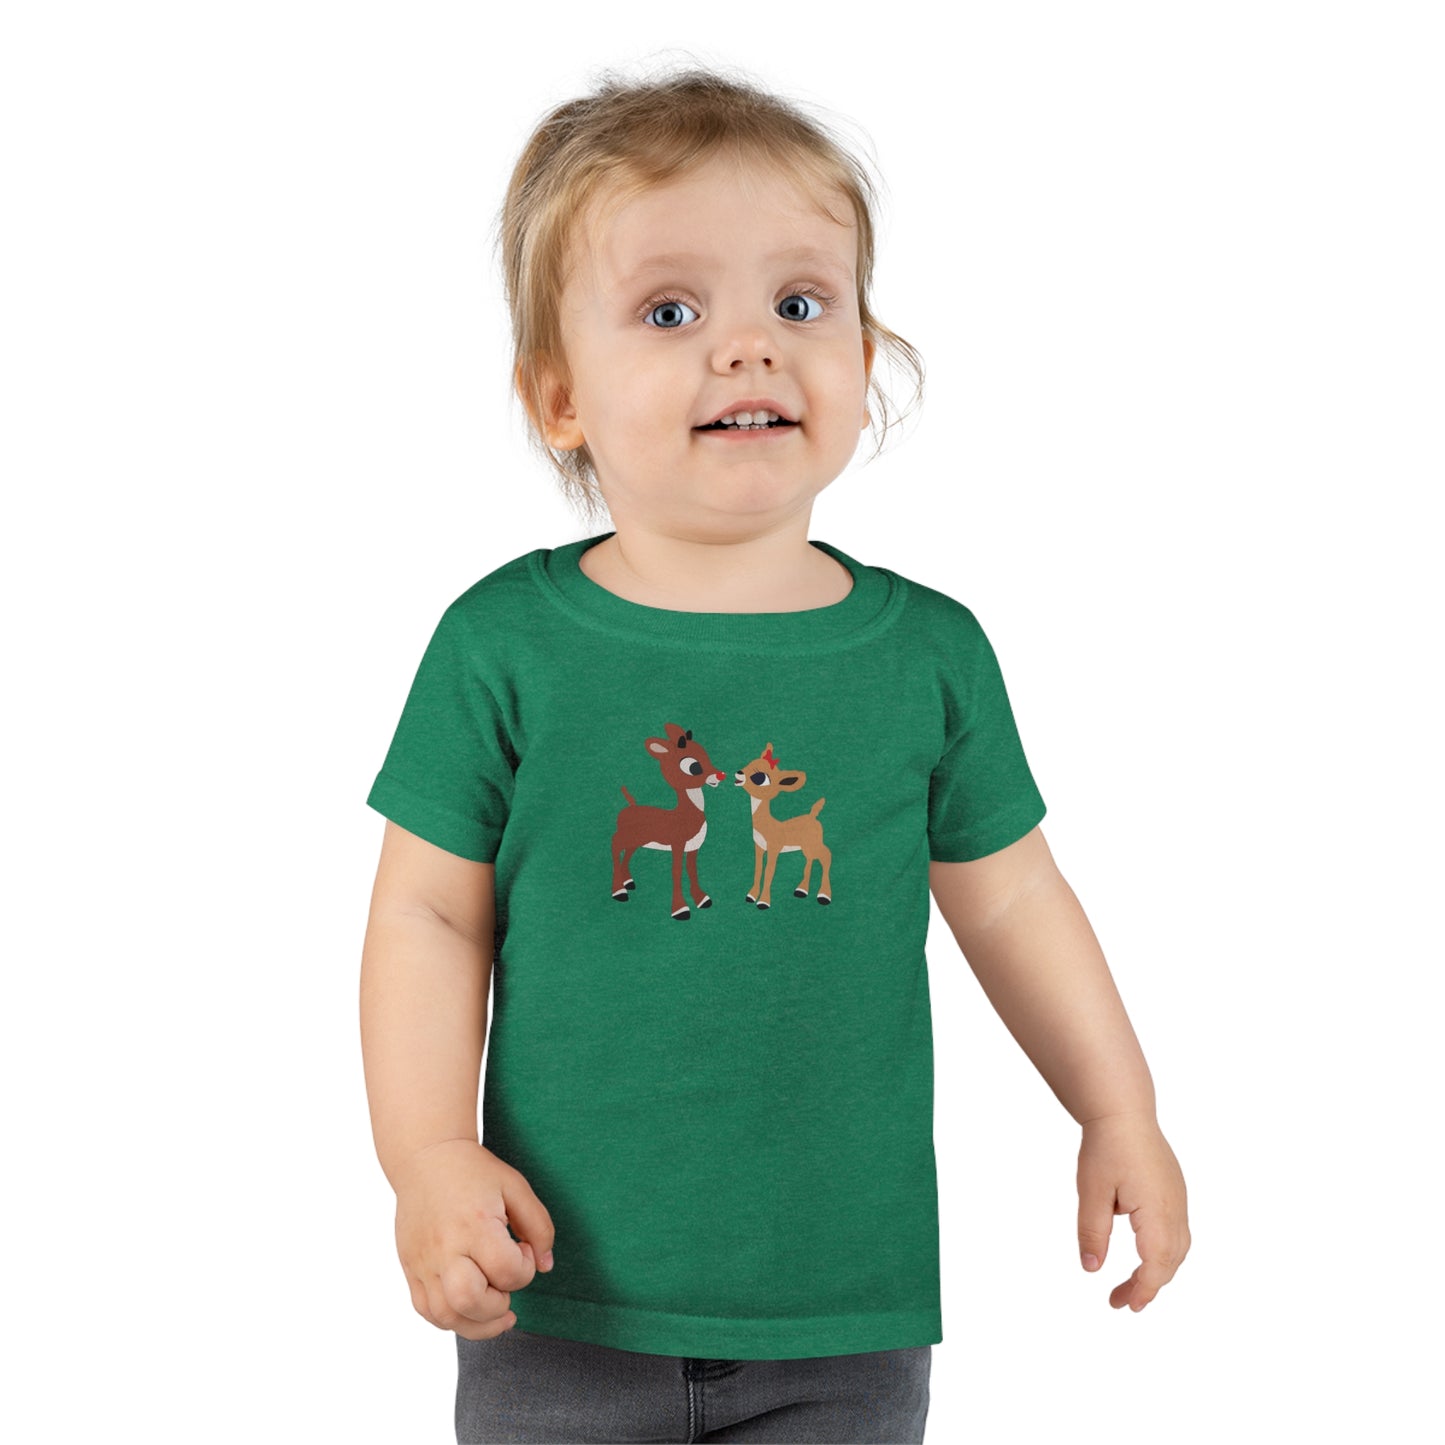 Rudolph The Red Nose Reindeer Toddler T-shirt